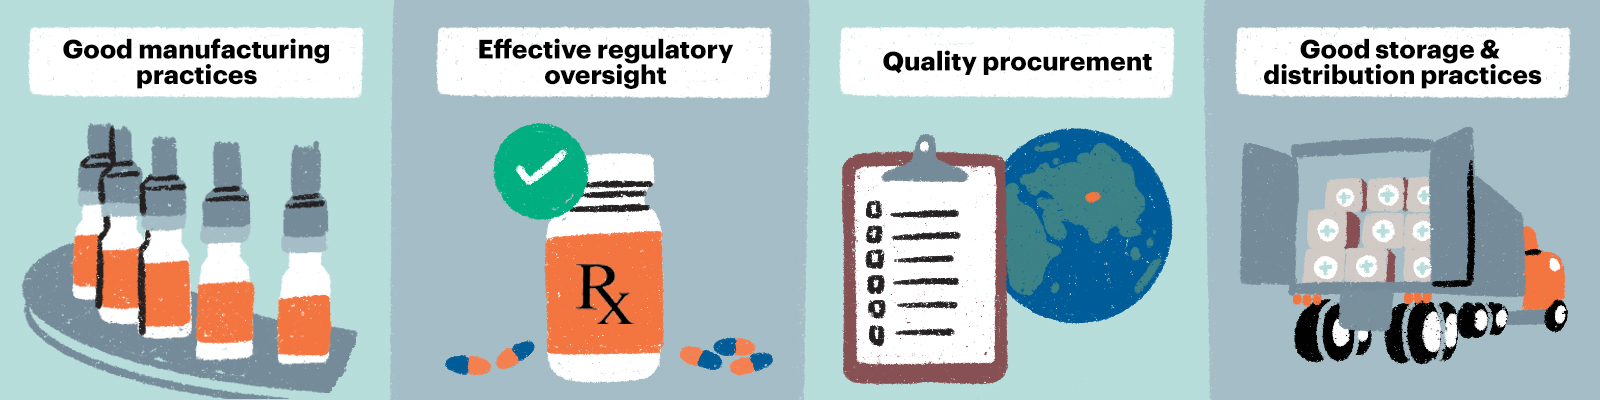 Measures that help safeguard quality across the supply chain 